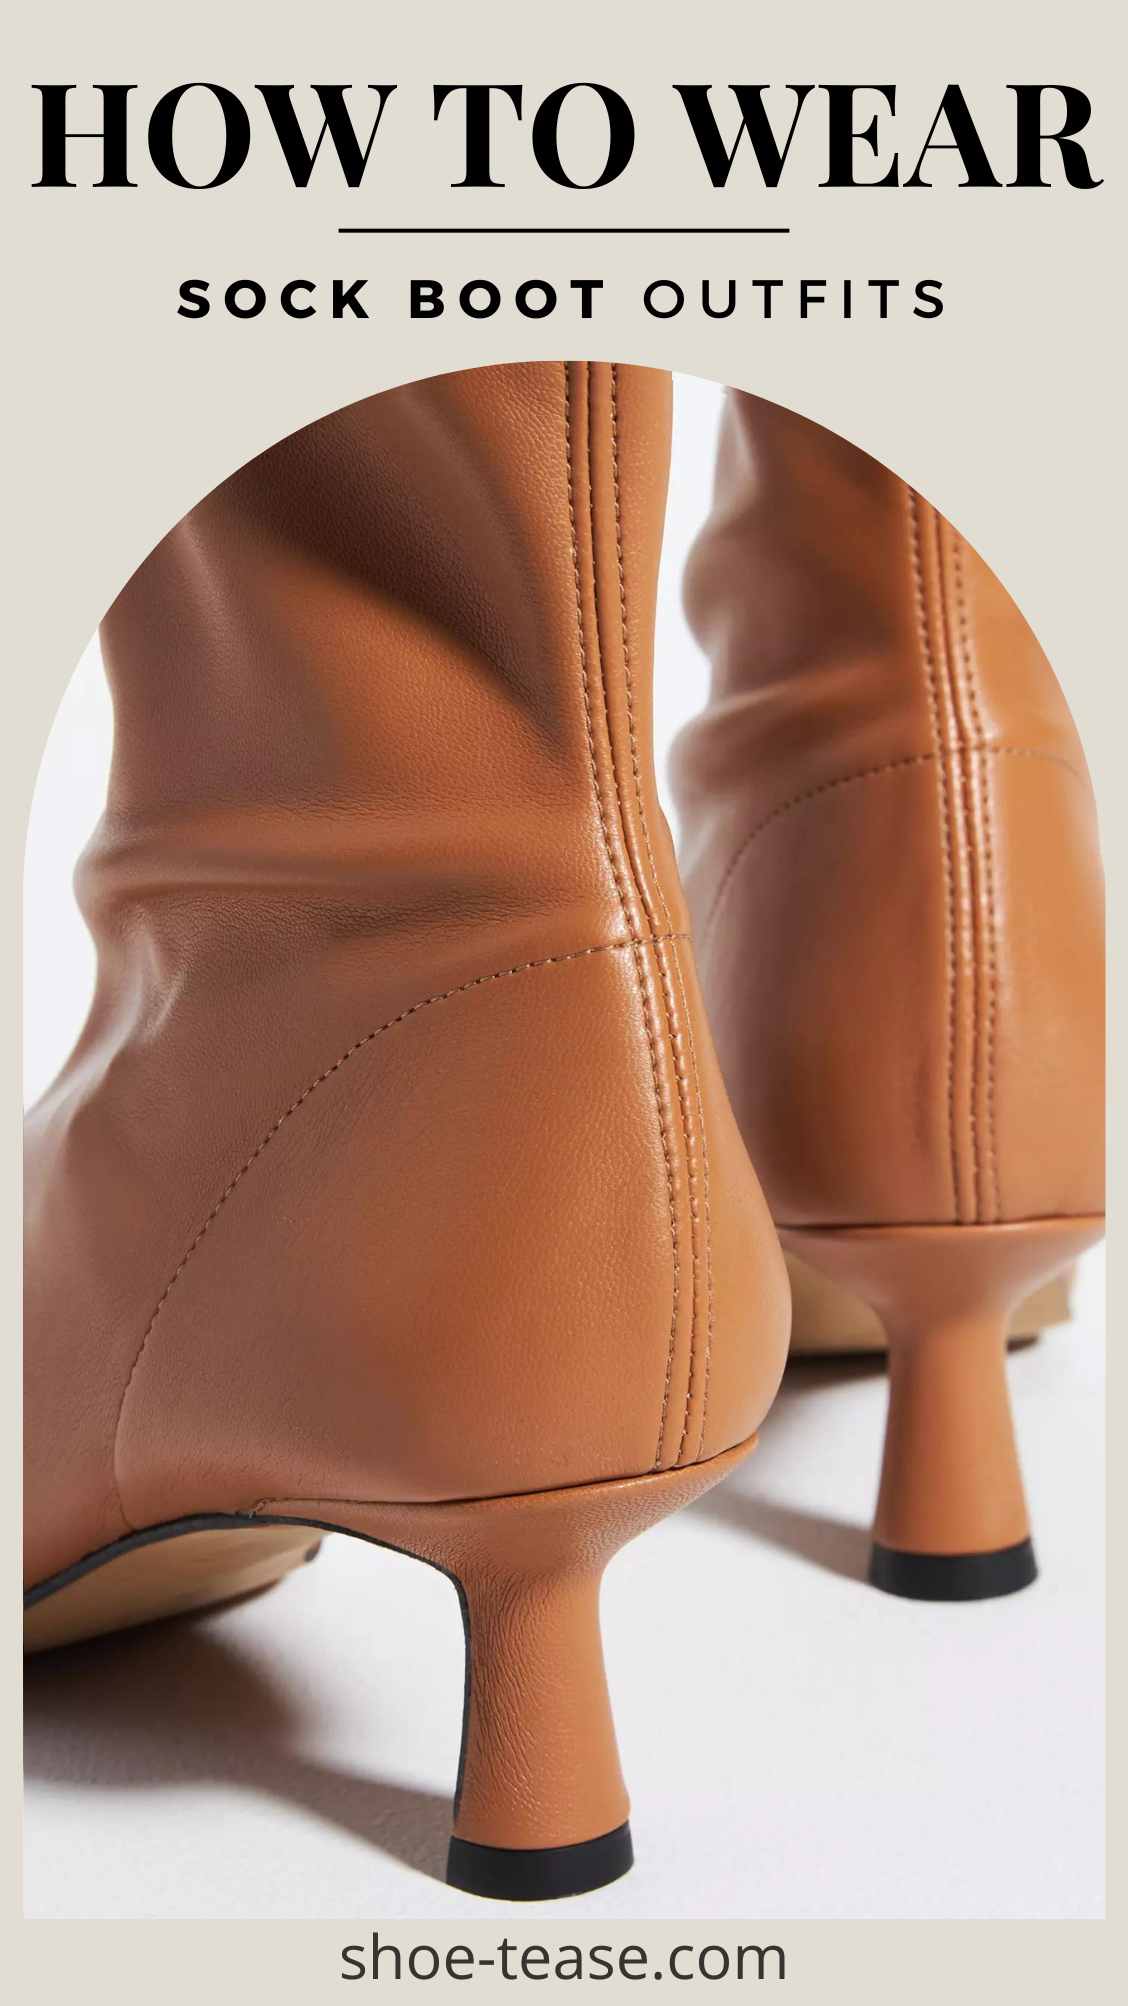 Text reading how to wear sock boots outfits over cropped close up image of women's caramel kitten heeled leather sock boots.